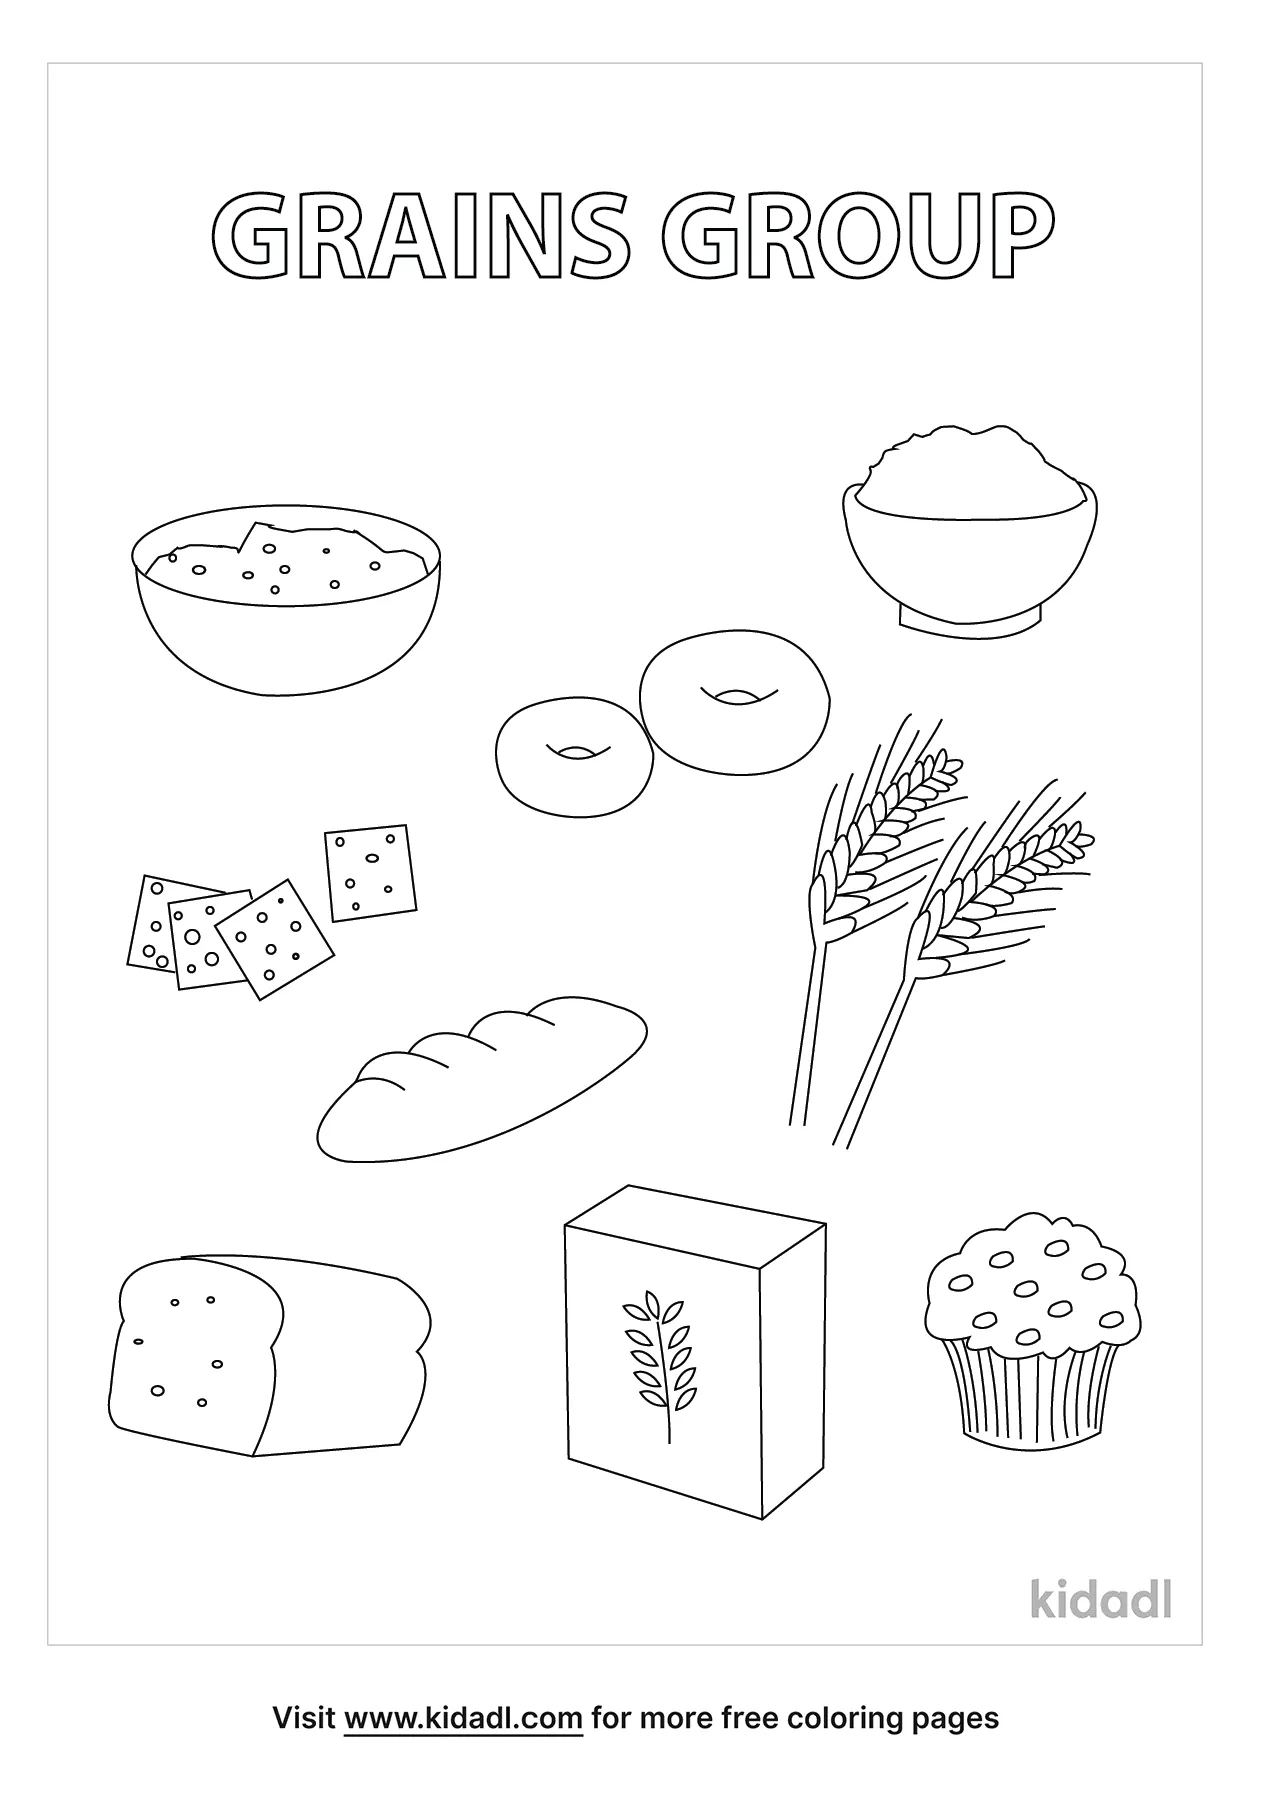 Free grain group coloring page coloring page printables